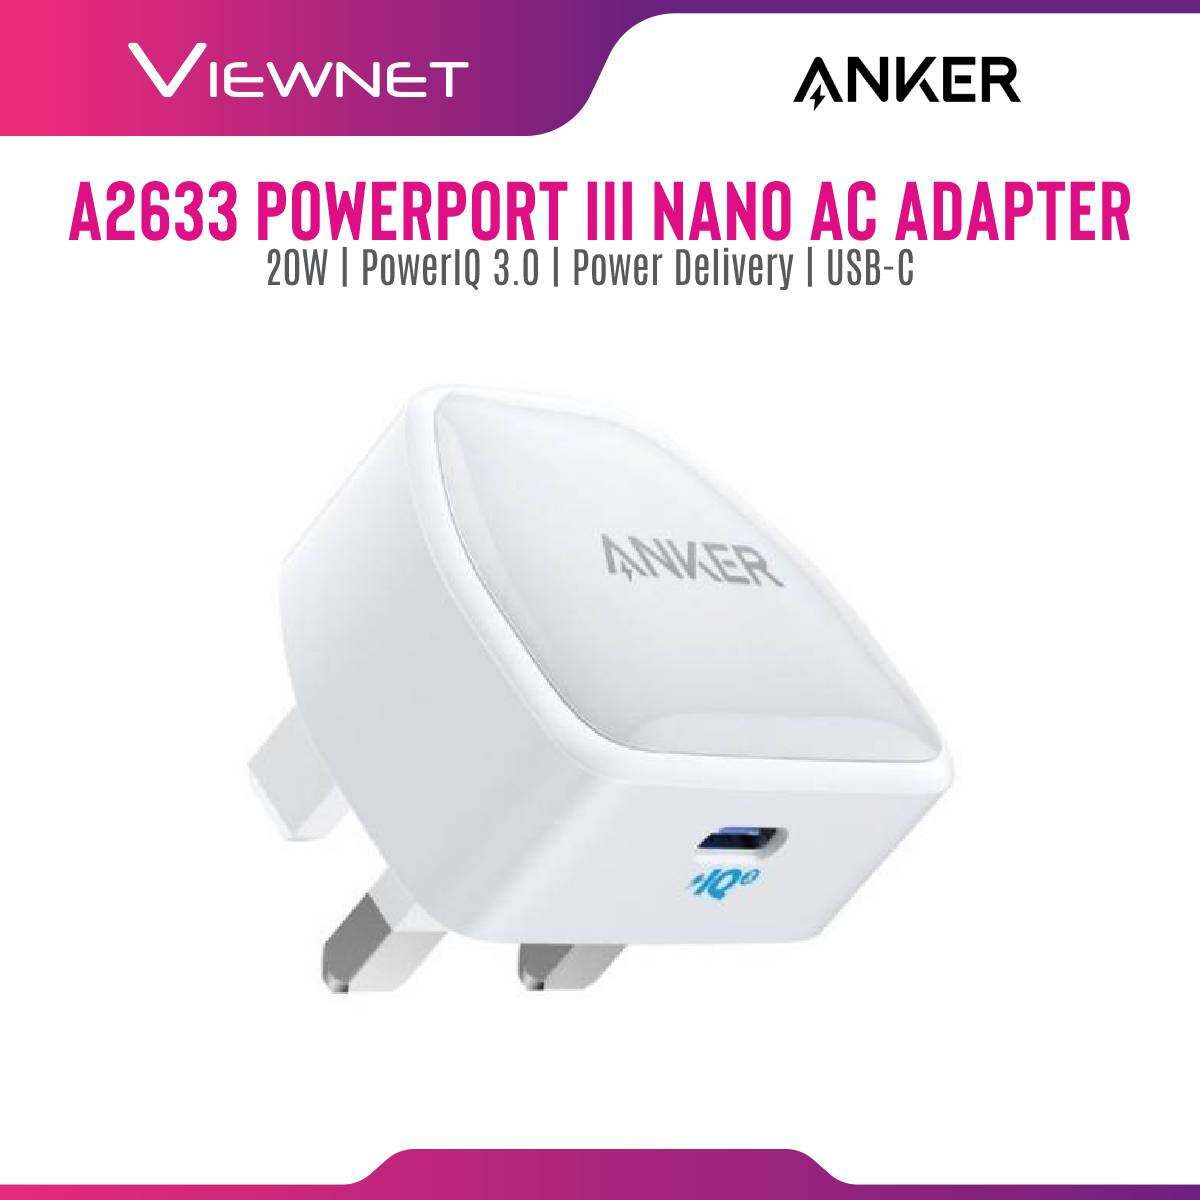 Anker A2633 PowerPort III Nano iPhone Charger, 20W PIQ 3.0  USB-C Charger for iPhone 12/12 Mini/12 Pro/12 Pro Max Black/White